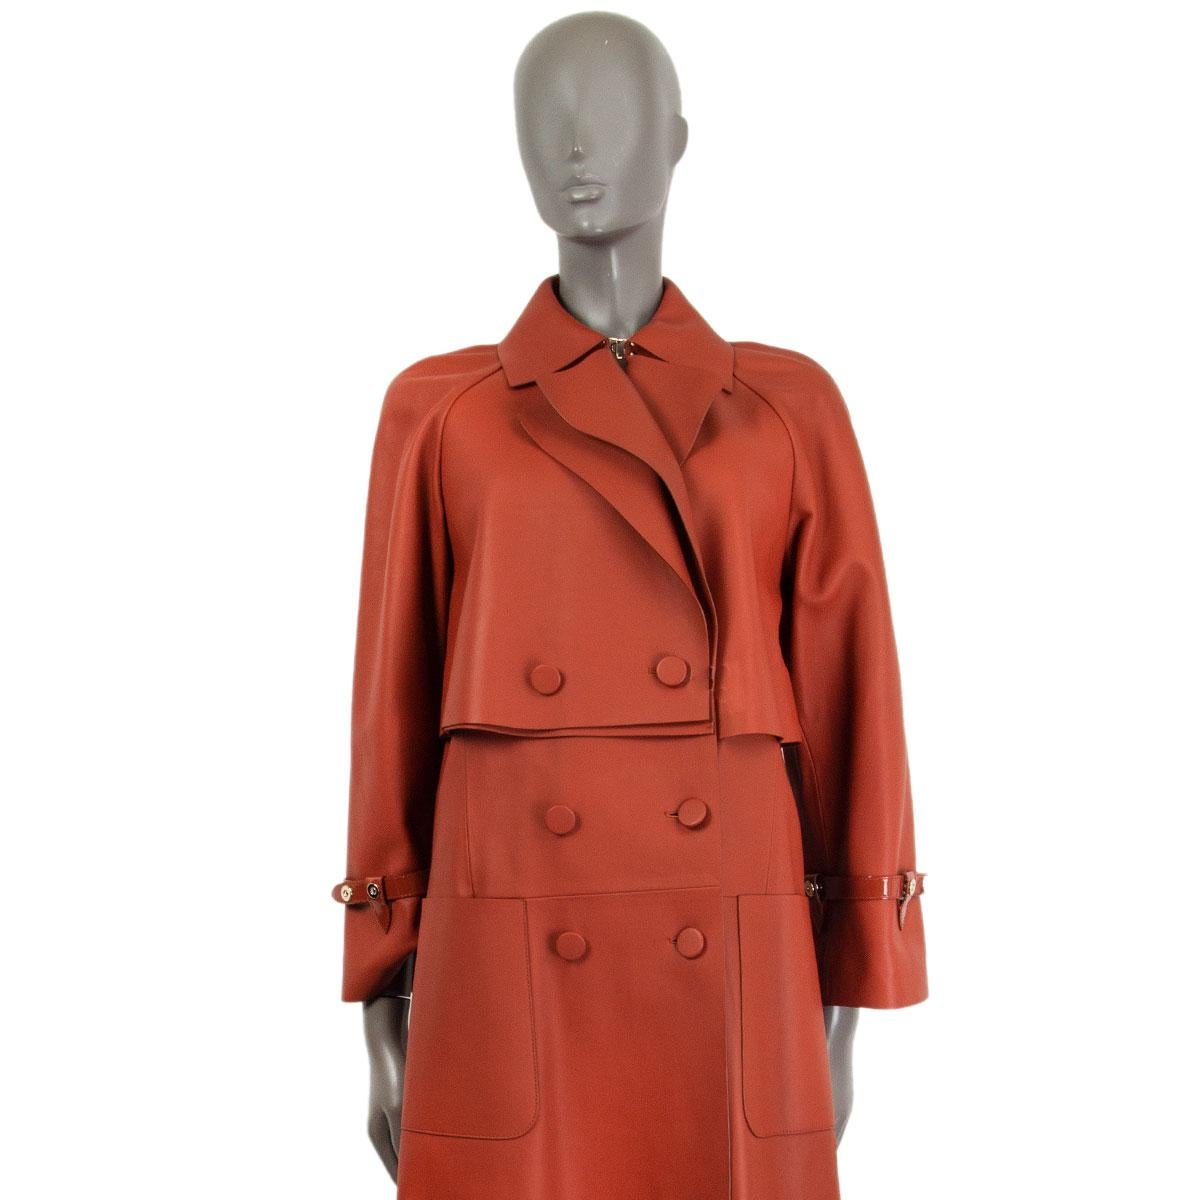 authentic Fendi double-breasted trench coat in terra cotta lamb leather with a peak collar and deep slip frontal pockets. Closes with buttons and fastens with one hook at the neckline. Has long sleeves with patent leather band details. Lined in